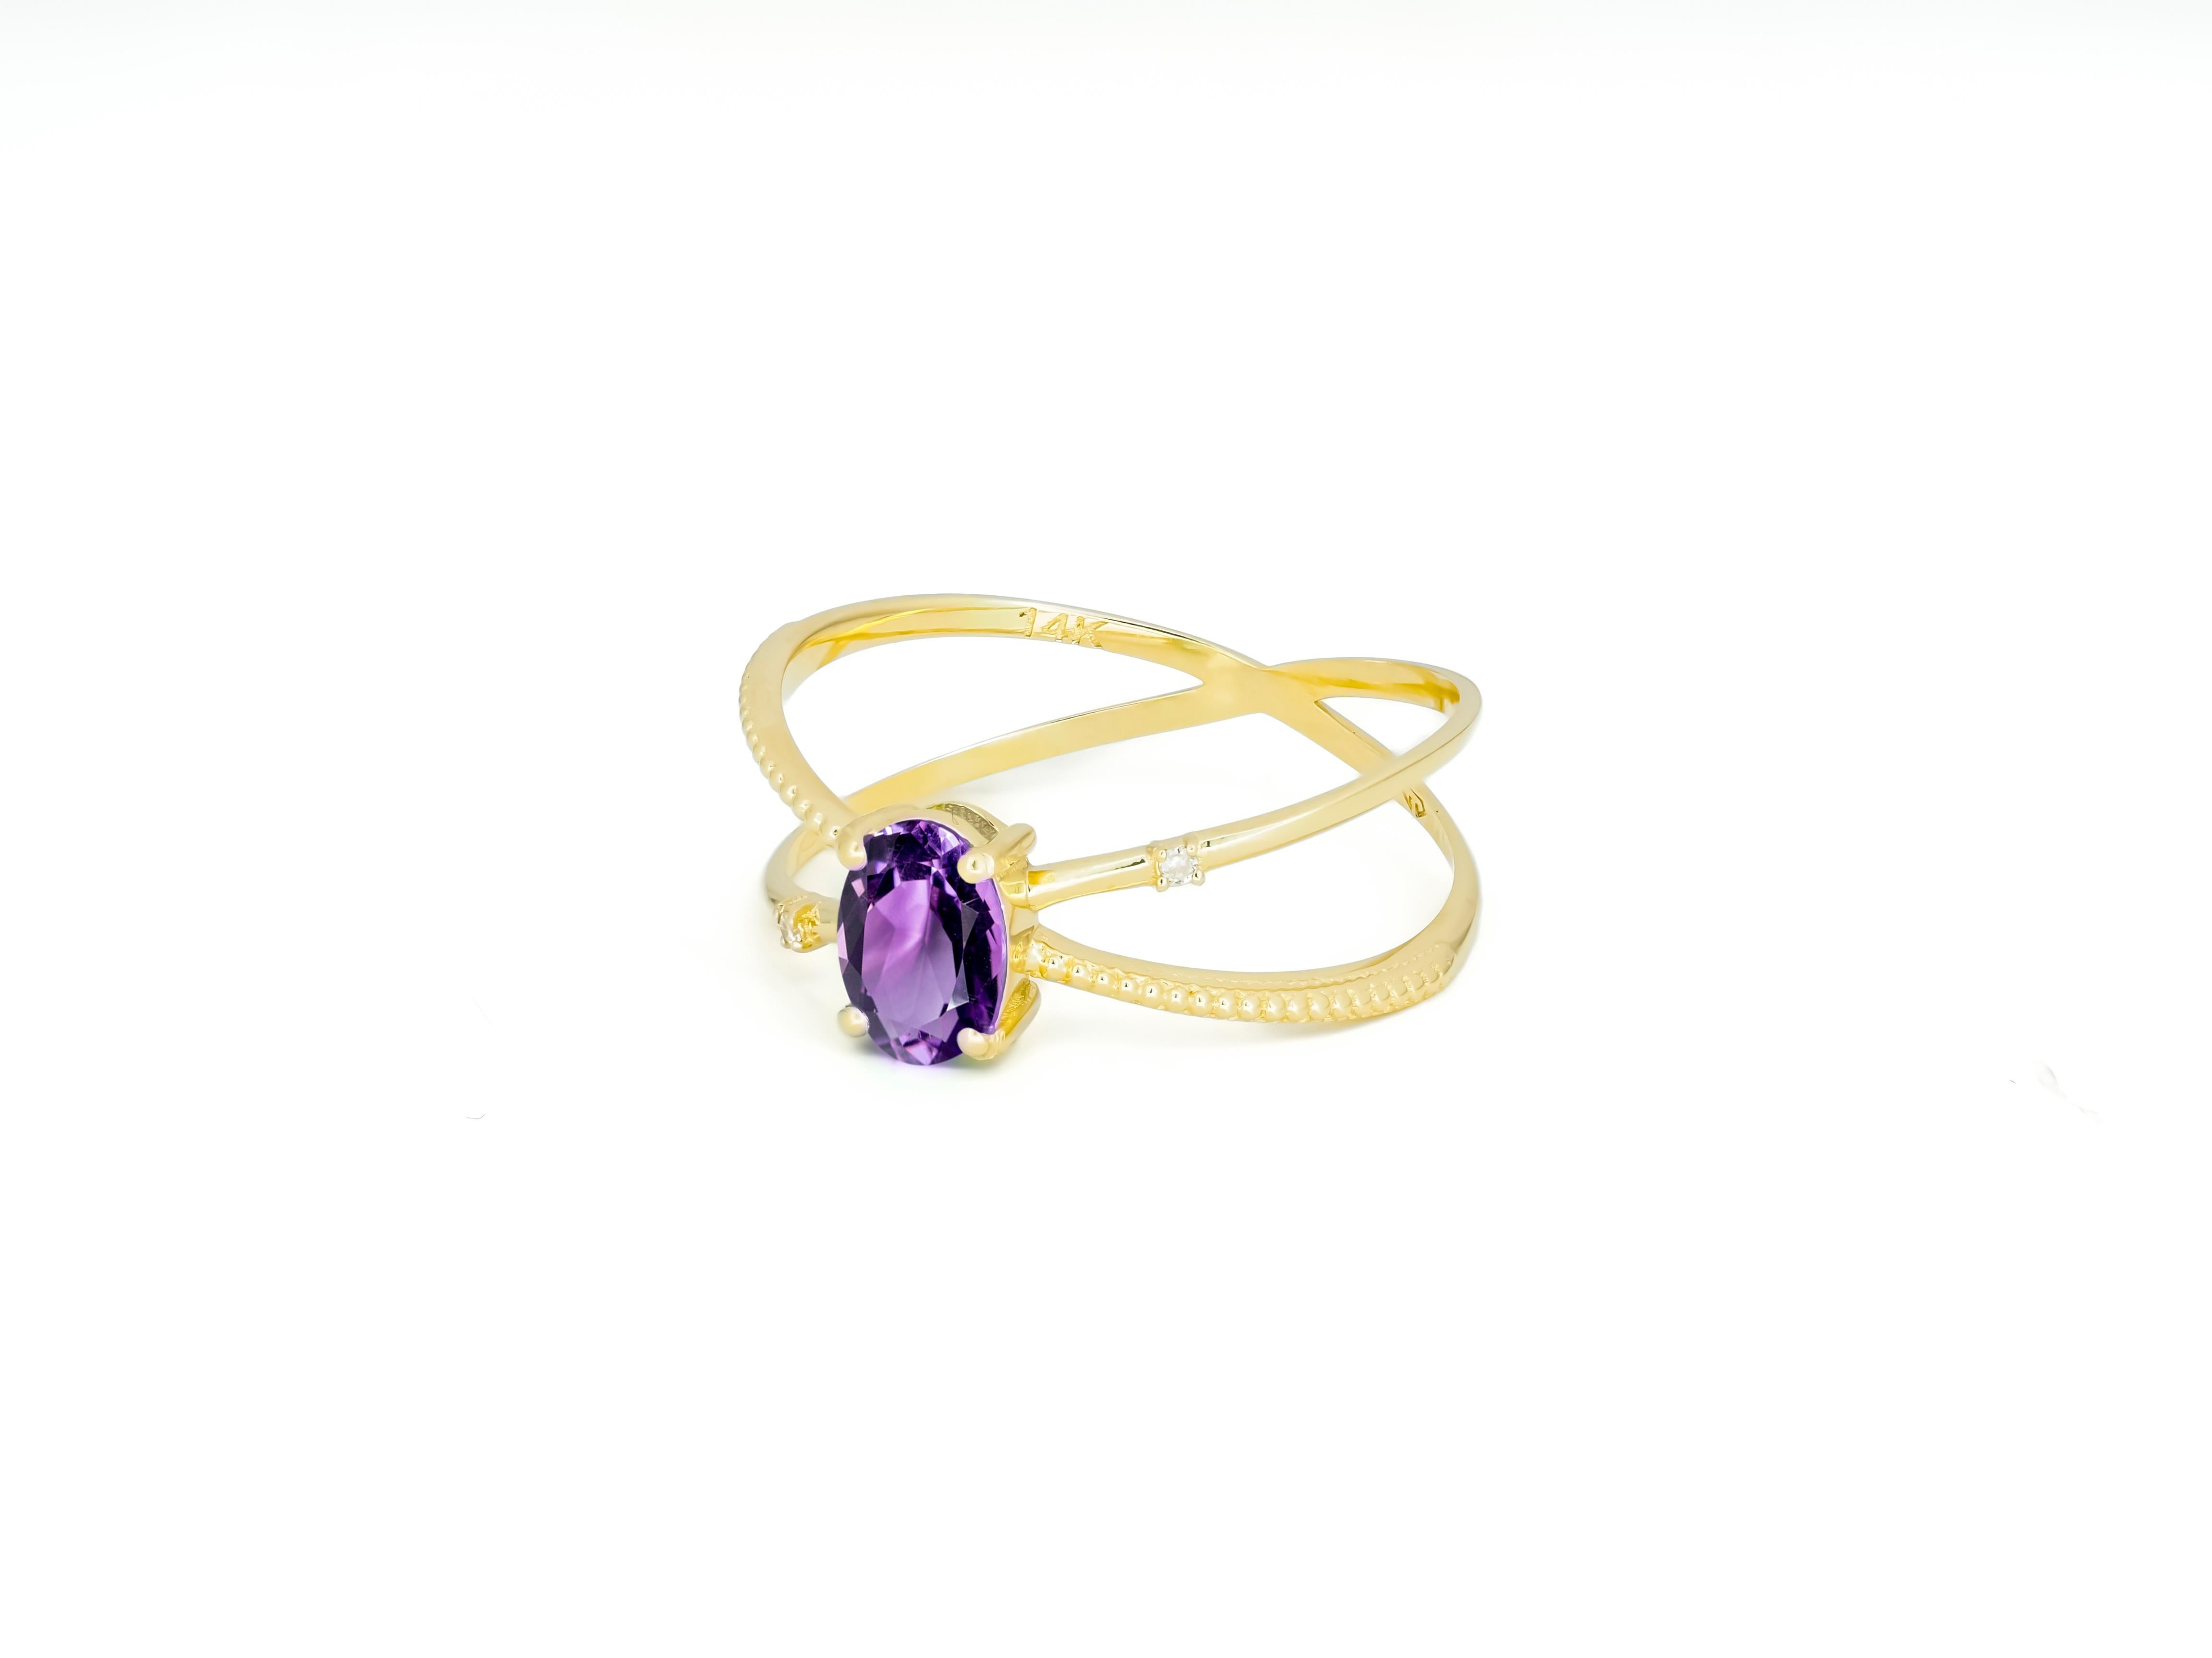 Oval Cut Amethyst Spiral Ring, Oval Amethyst Ring, Amethyst Gold Ring For Sale